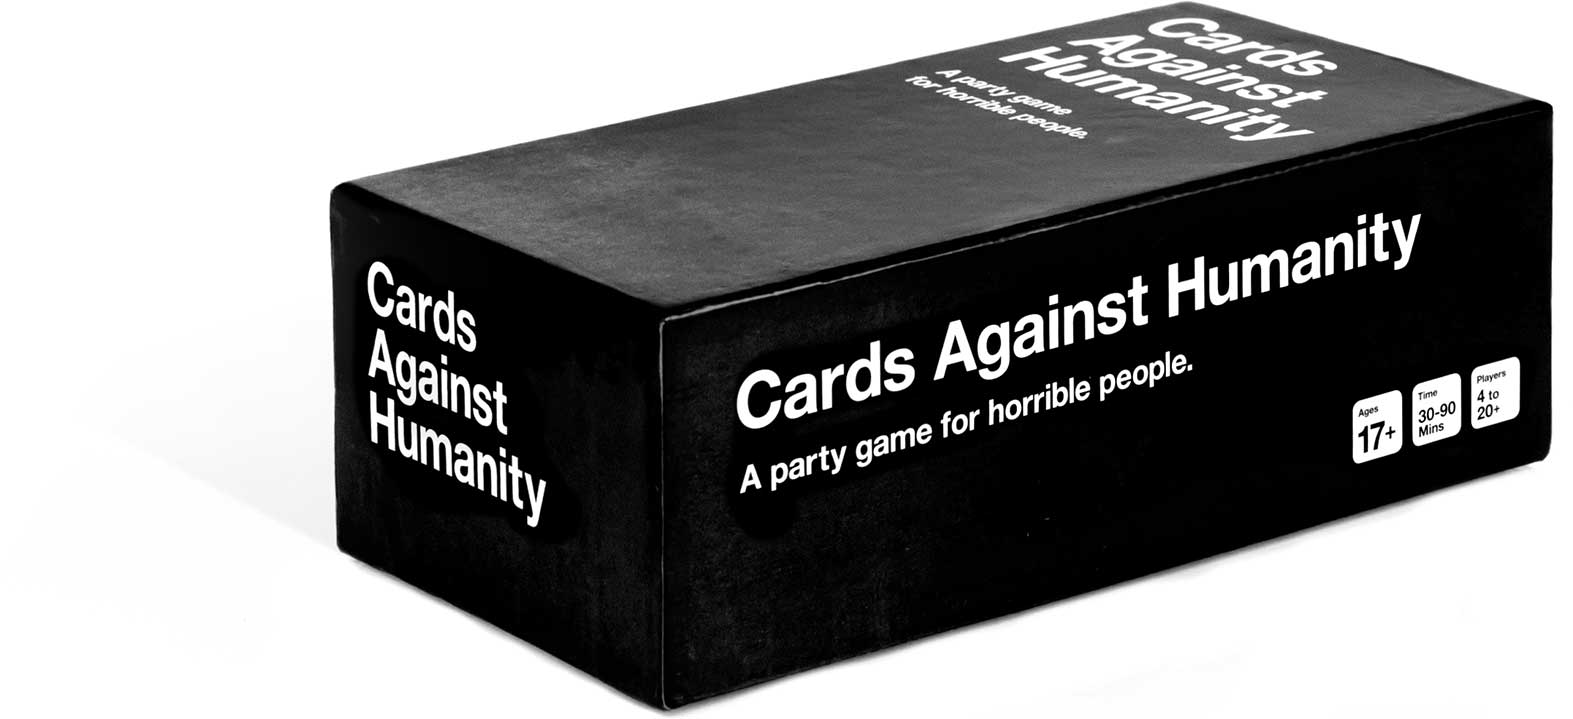 How to play Cards Against Humanity online with friends